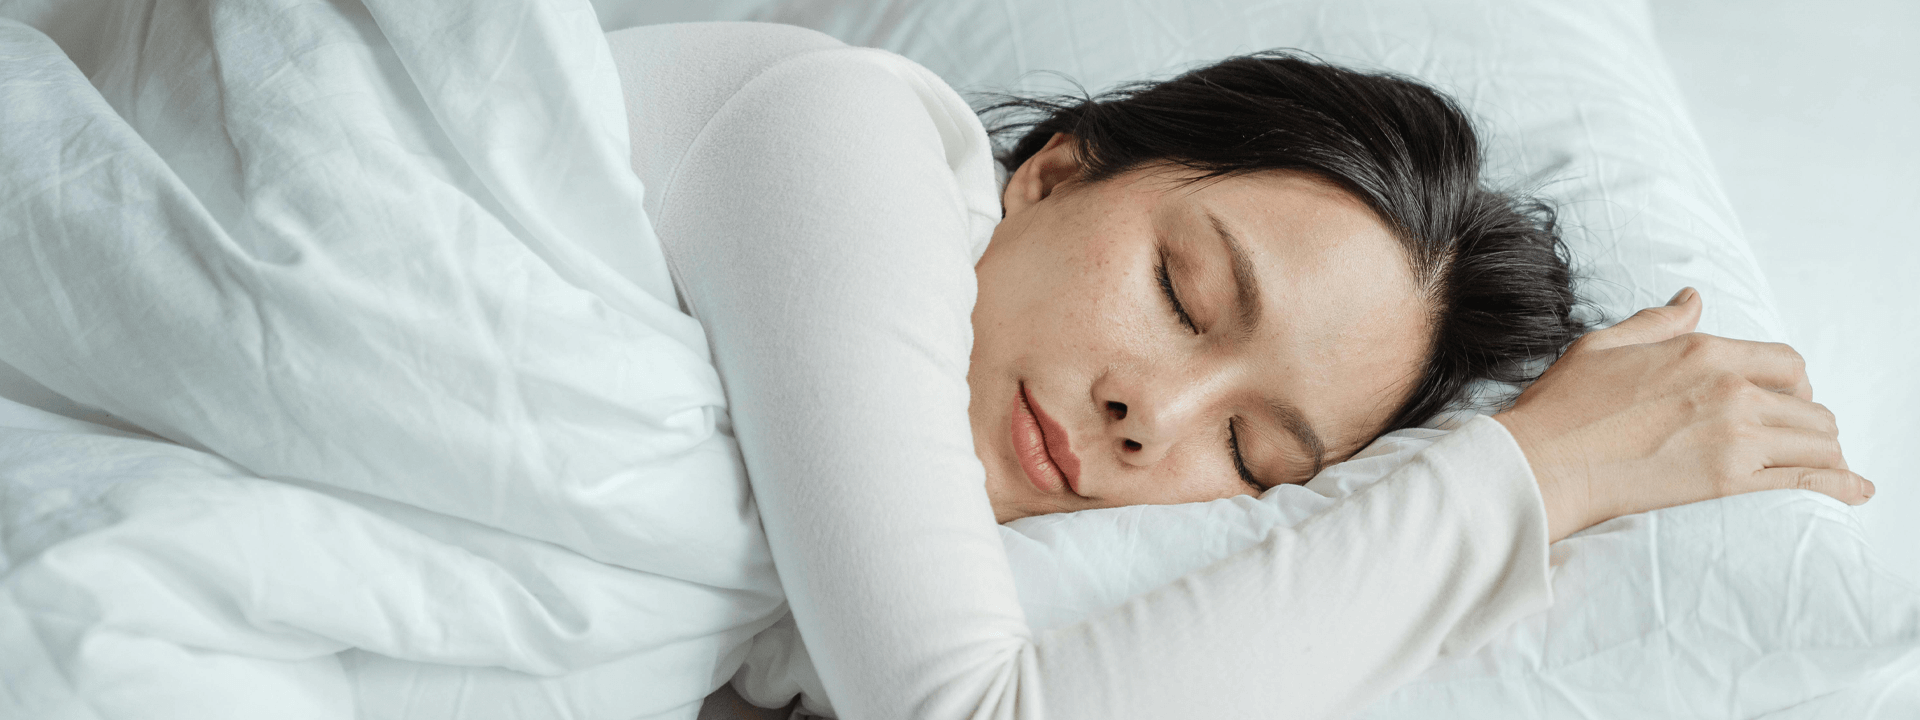 Lack of Sleep: Can It Make You Sick?